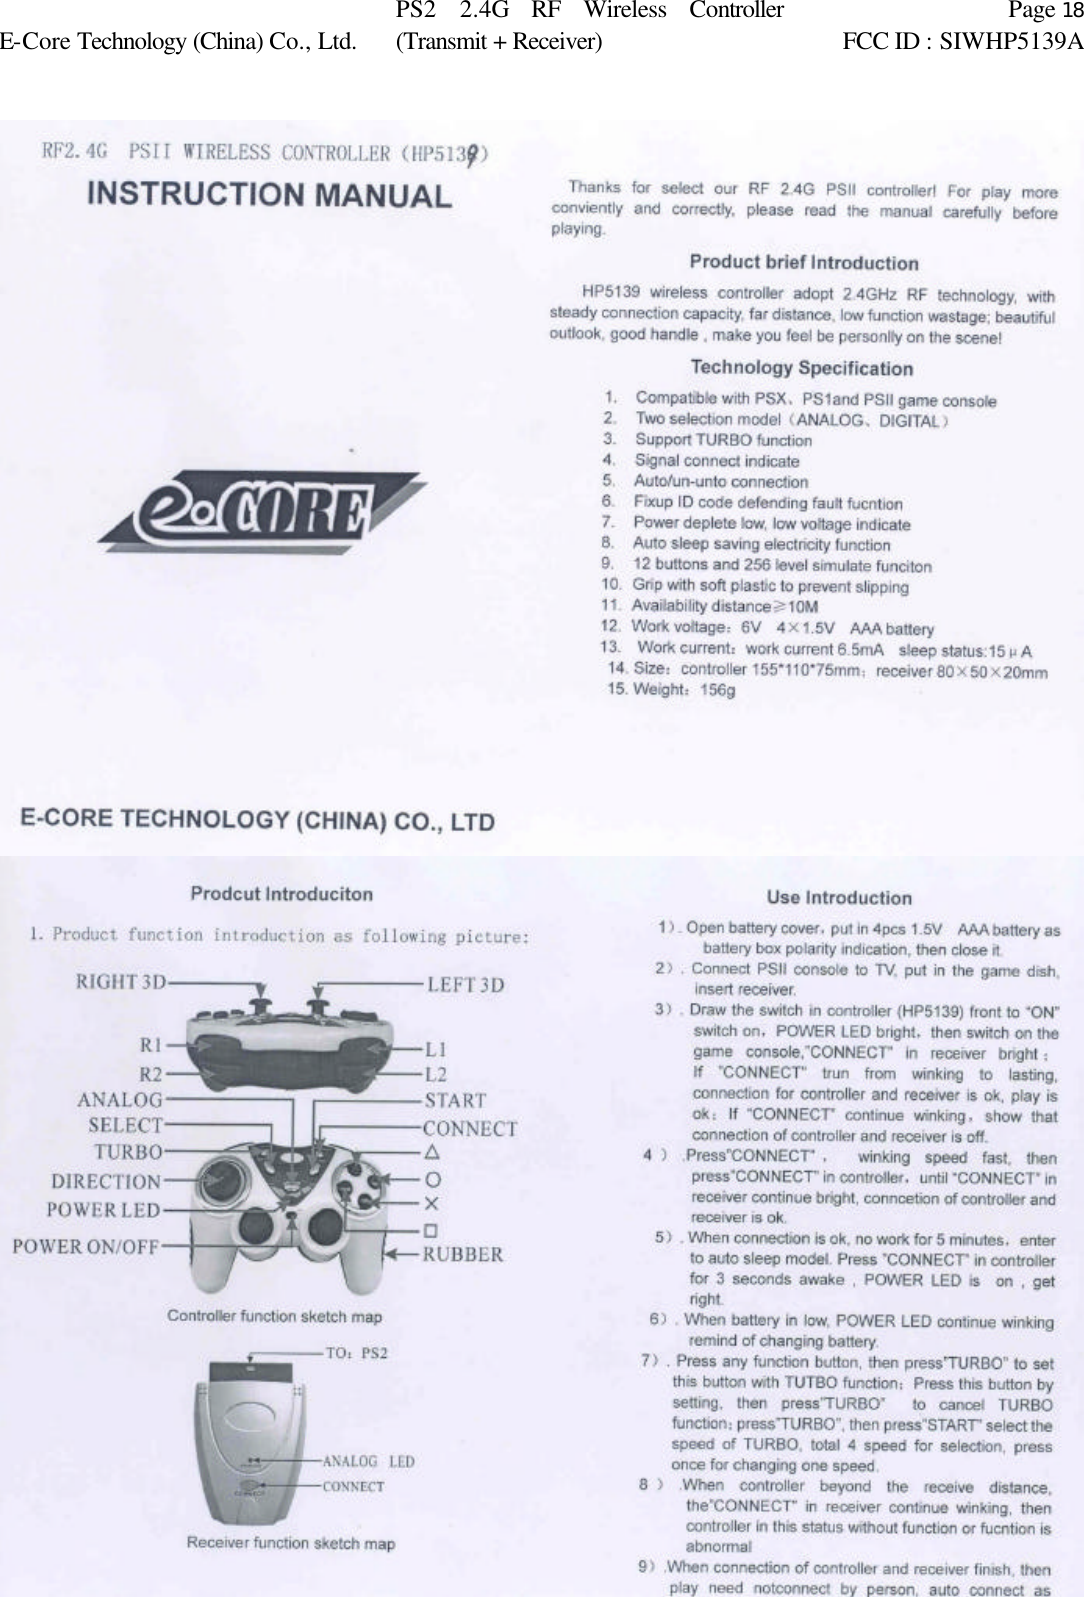  Page 18 E-Core Technology (China) Co., Ltd. PS2 2.4G RF Wireless Controller (Transmit + Receiver) FCC ID : SIWHP5139A      